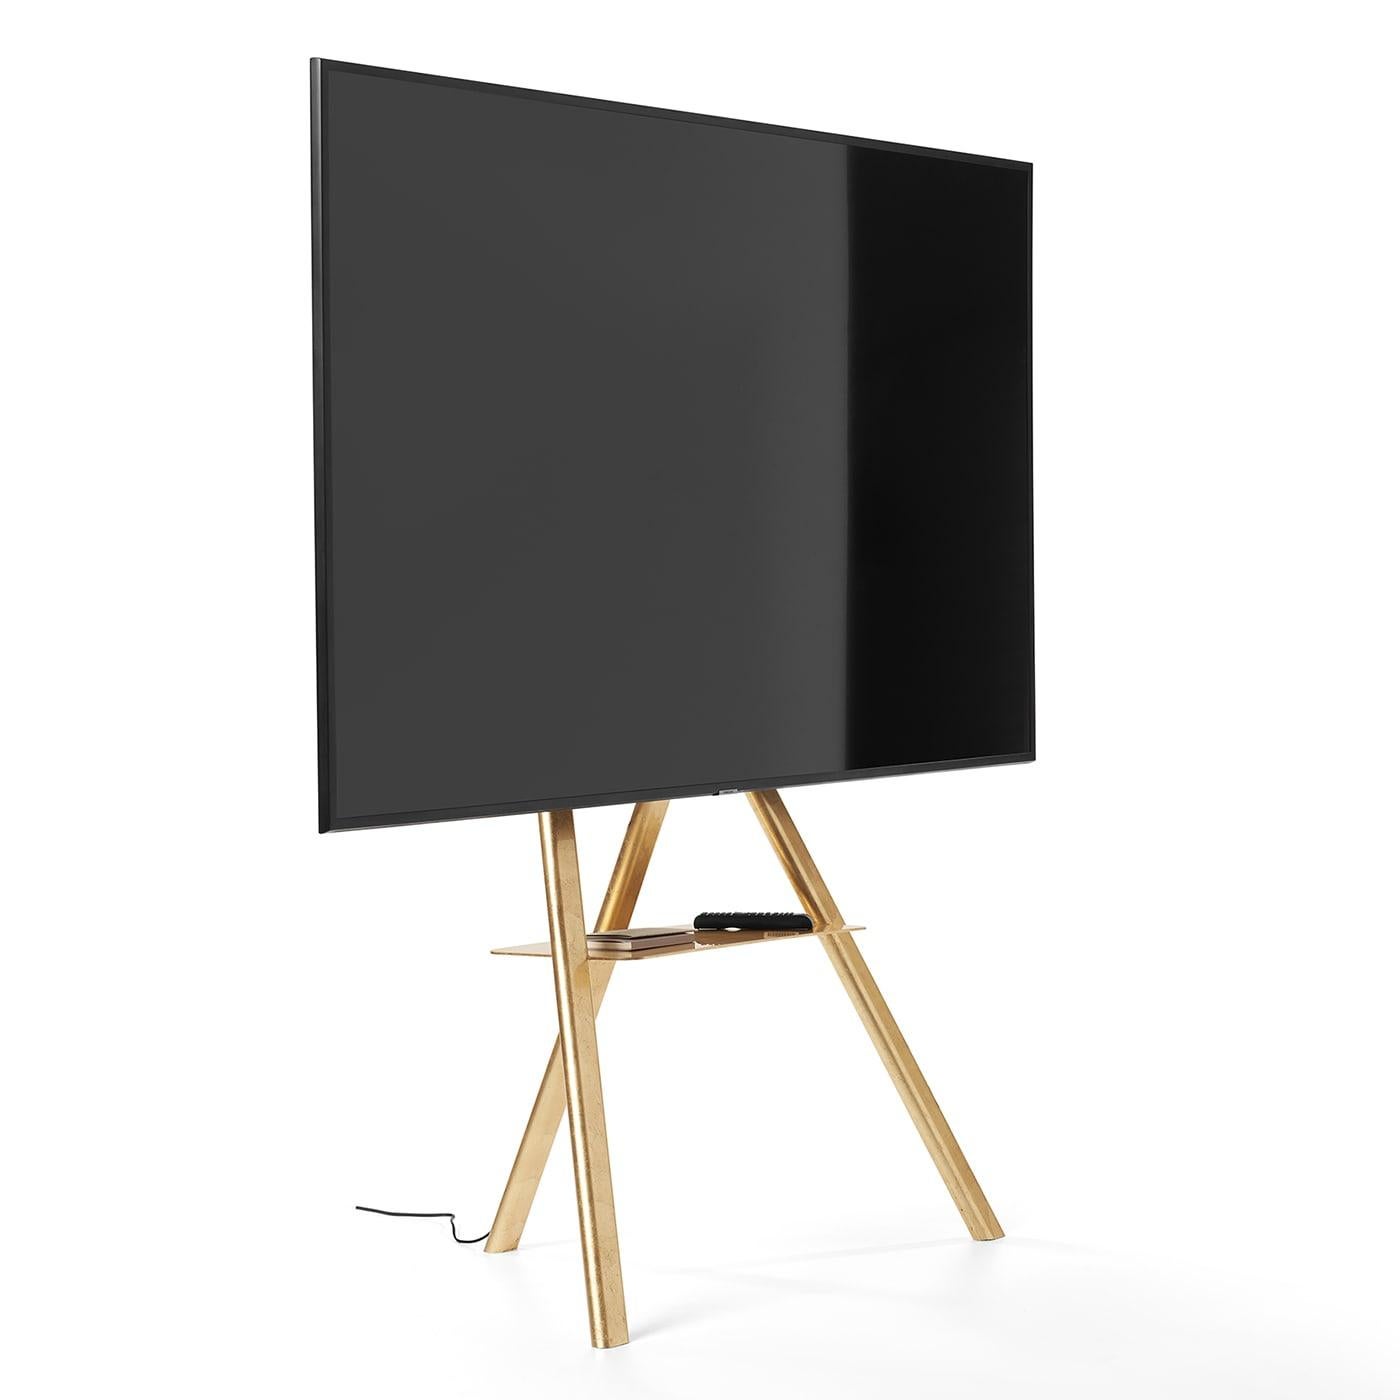 This superb steel tripod pairs the minimalist rigor of its clean lines with the luxe appeal of its sublime finish of polished gold leaf. Equipped with a practical shelf, it features a black frame element that can be fitted to smart TVs ( from 43